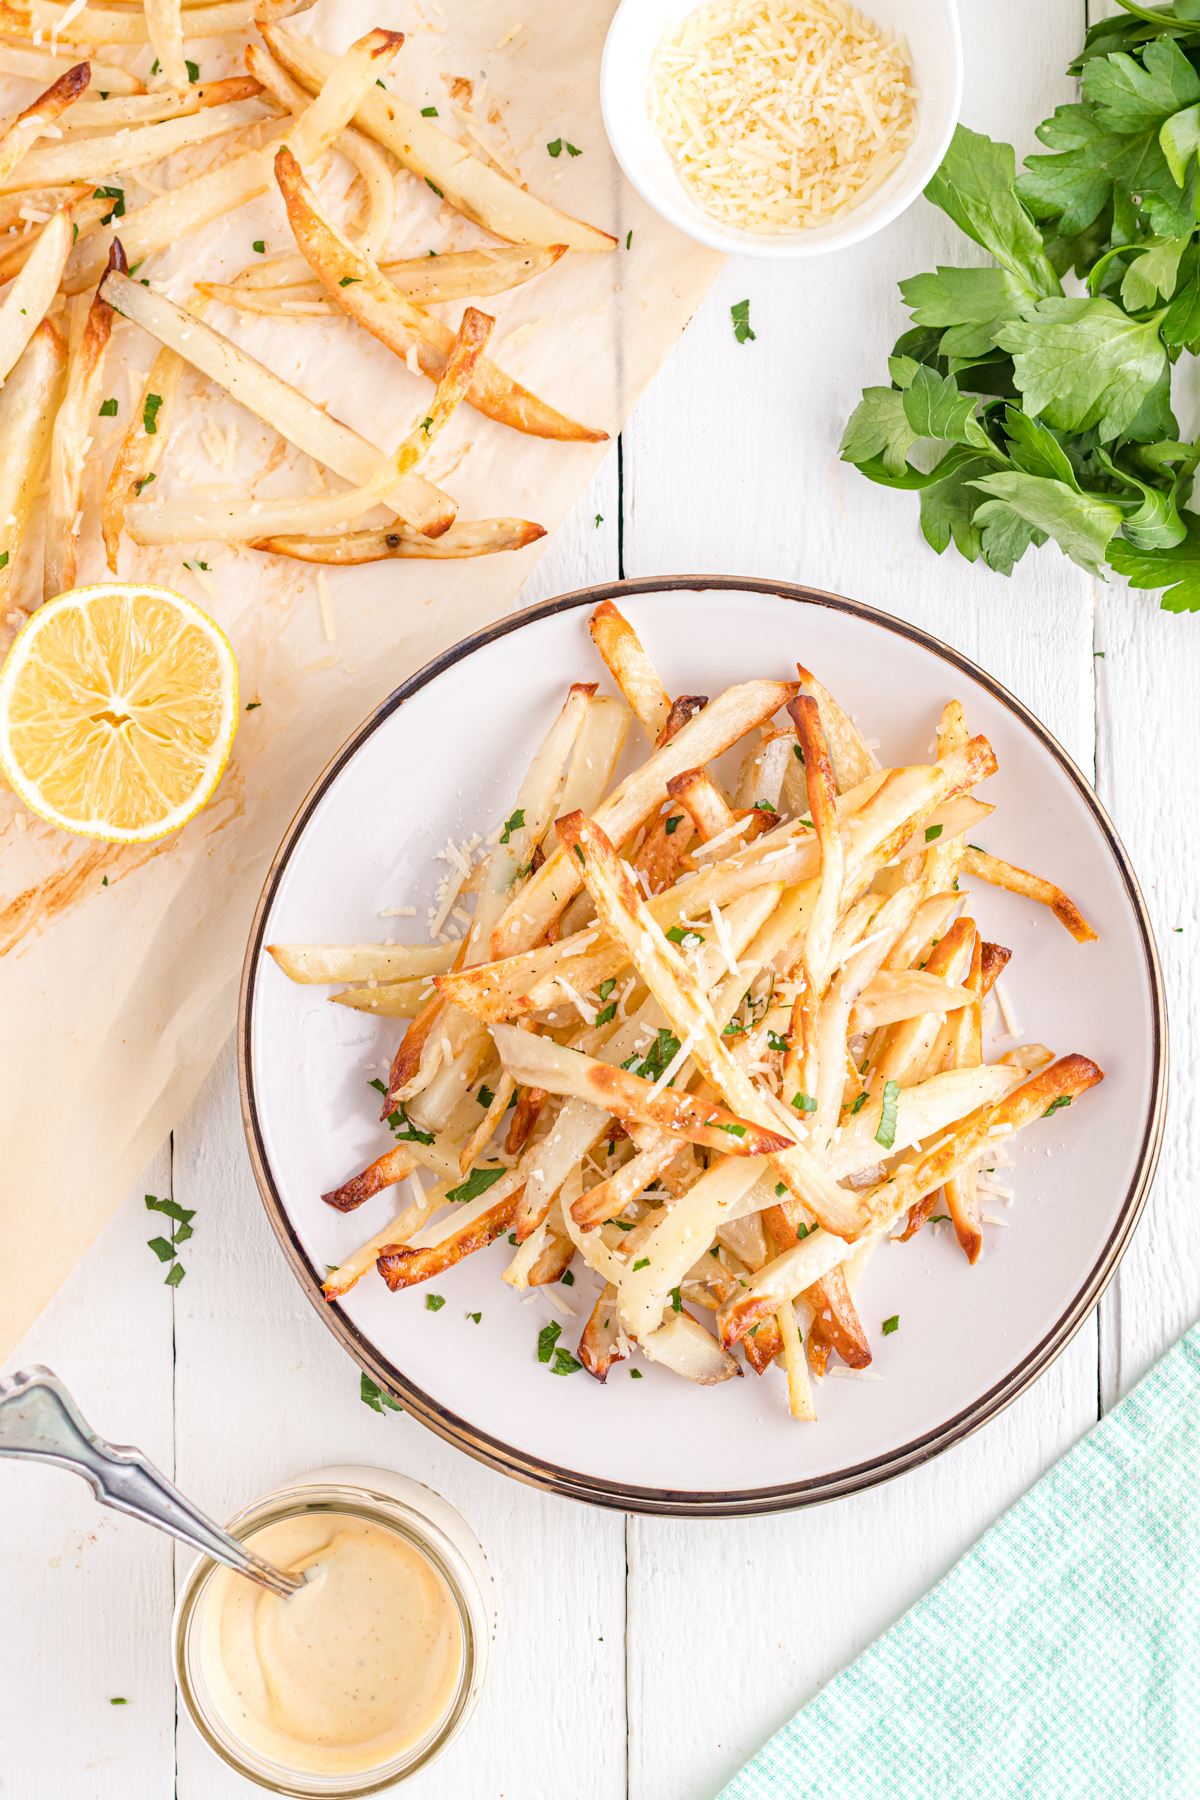 Fries on table with aioli and parsley.